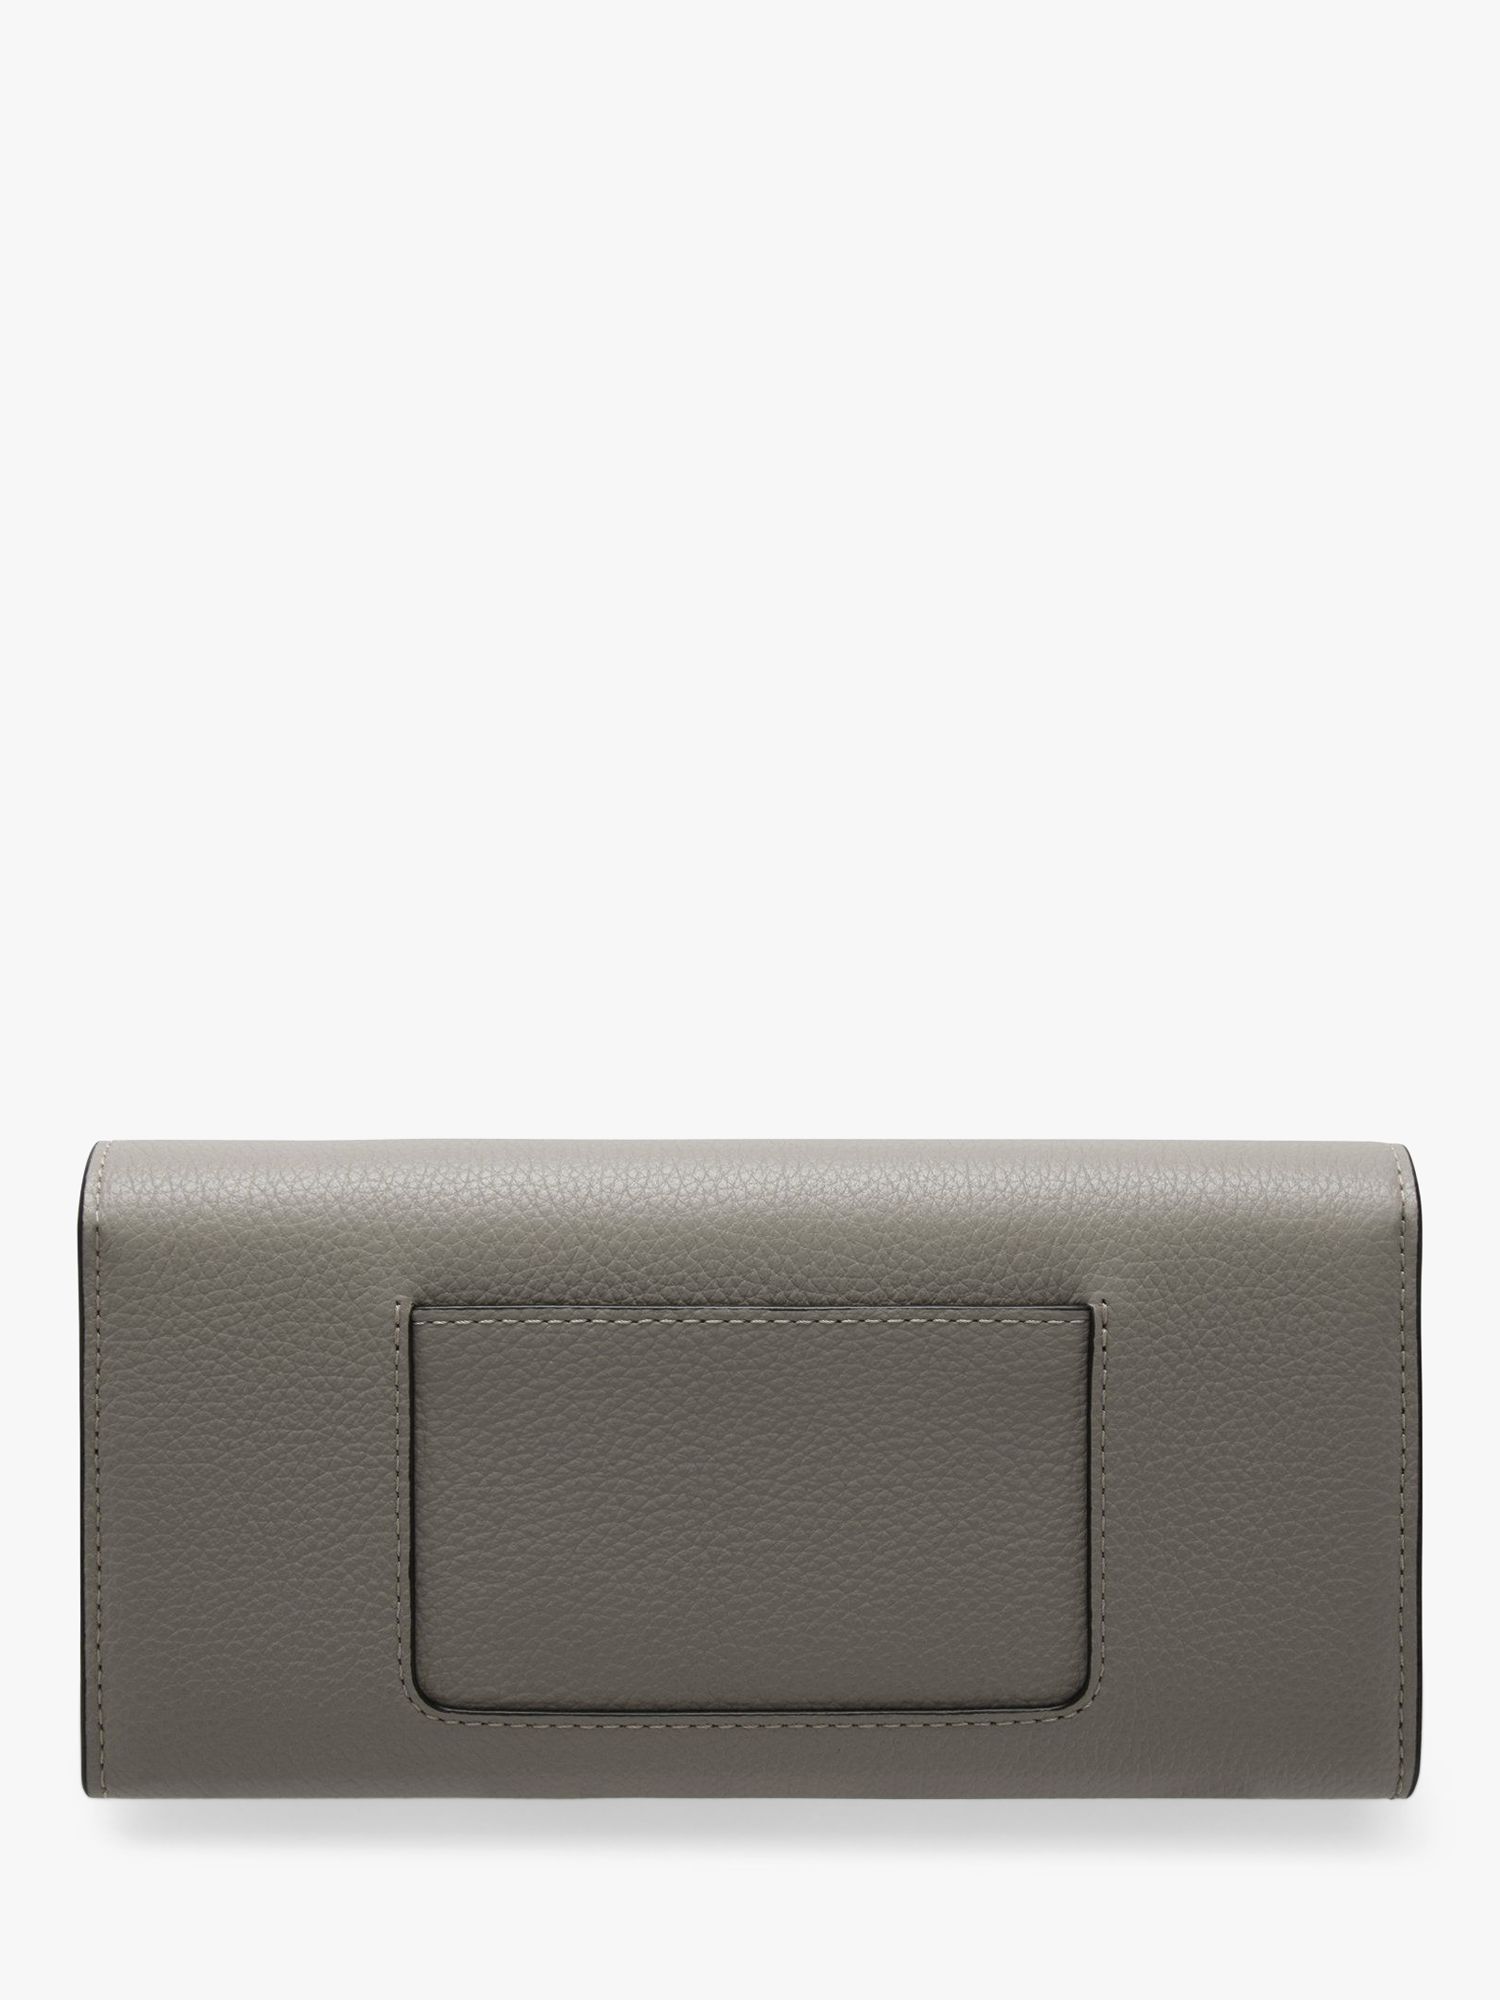 Buy Mulberry Darley Small Classic Grain Leather Wallet Online at johnlewis.com